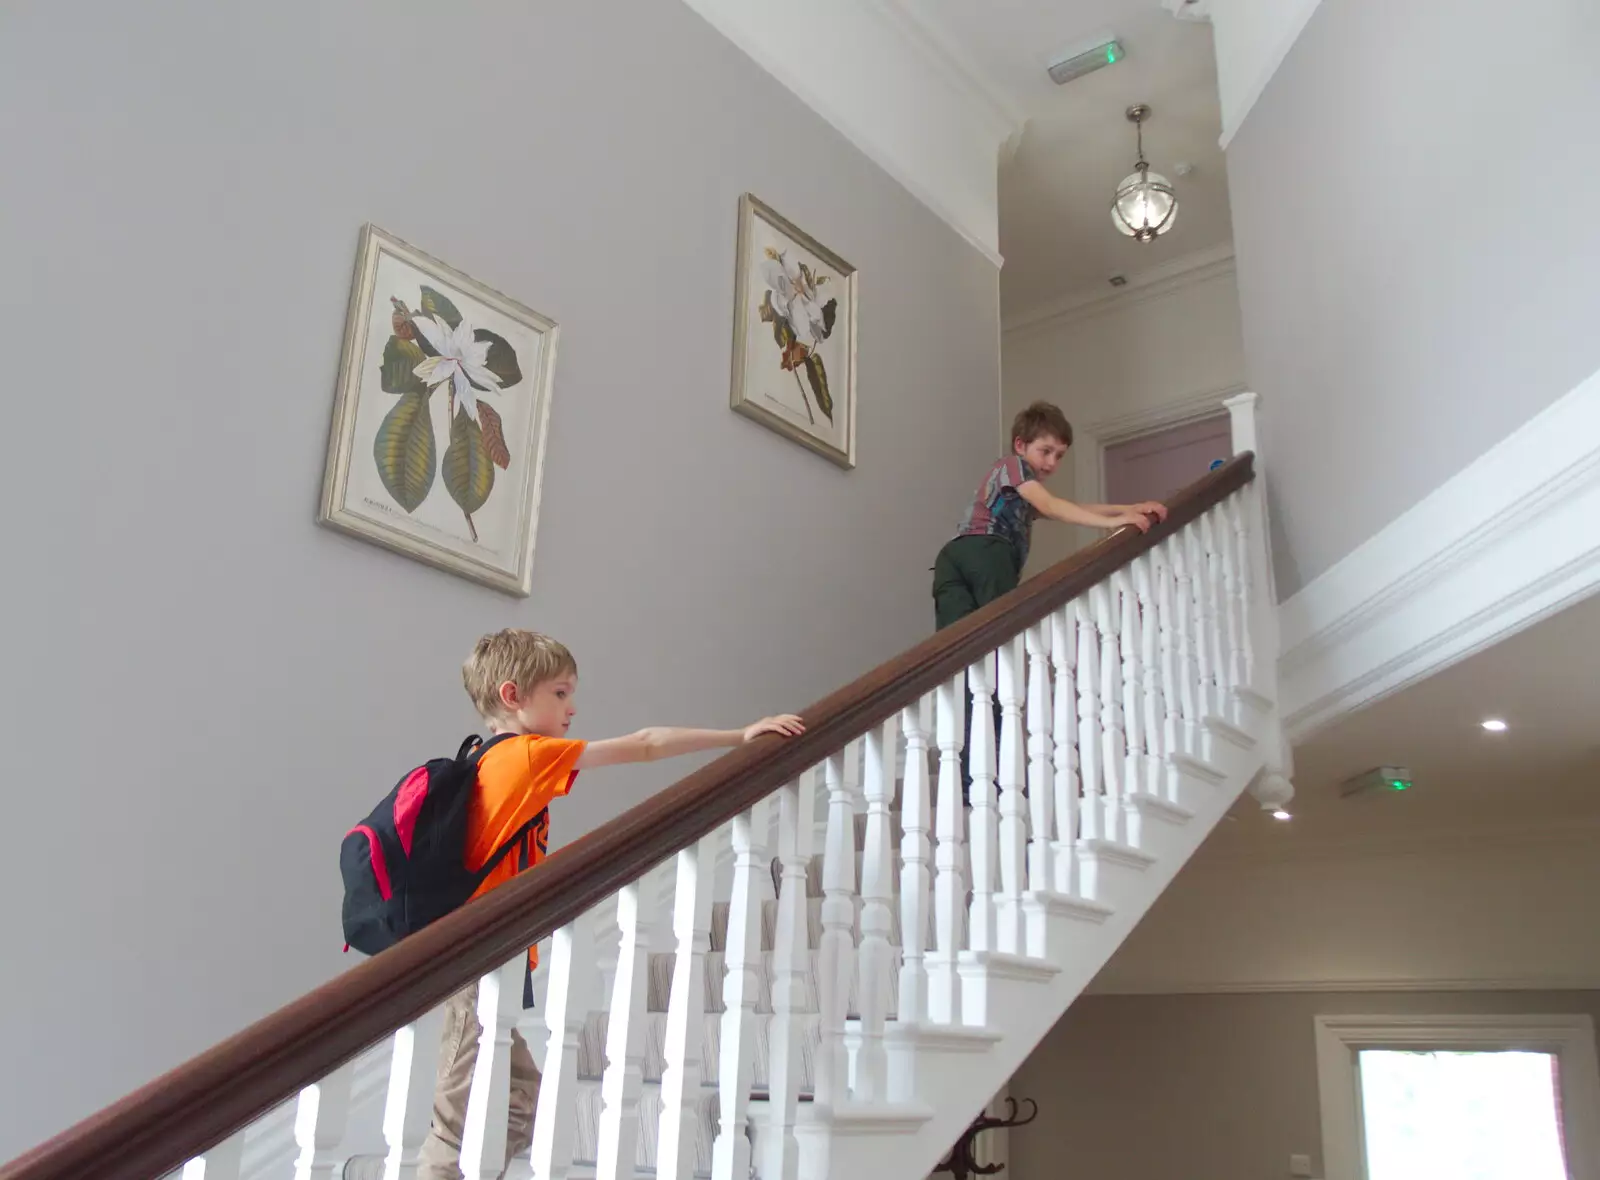 The boys climb the grand staircase, from Chagford Lido and a Trip to Parke, Bovey Tracey, Devon - 25th May 2019